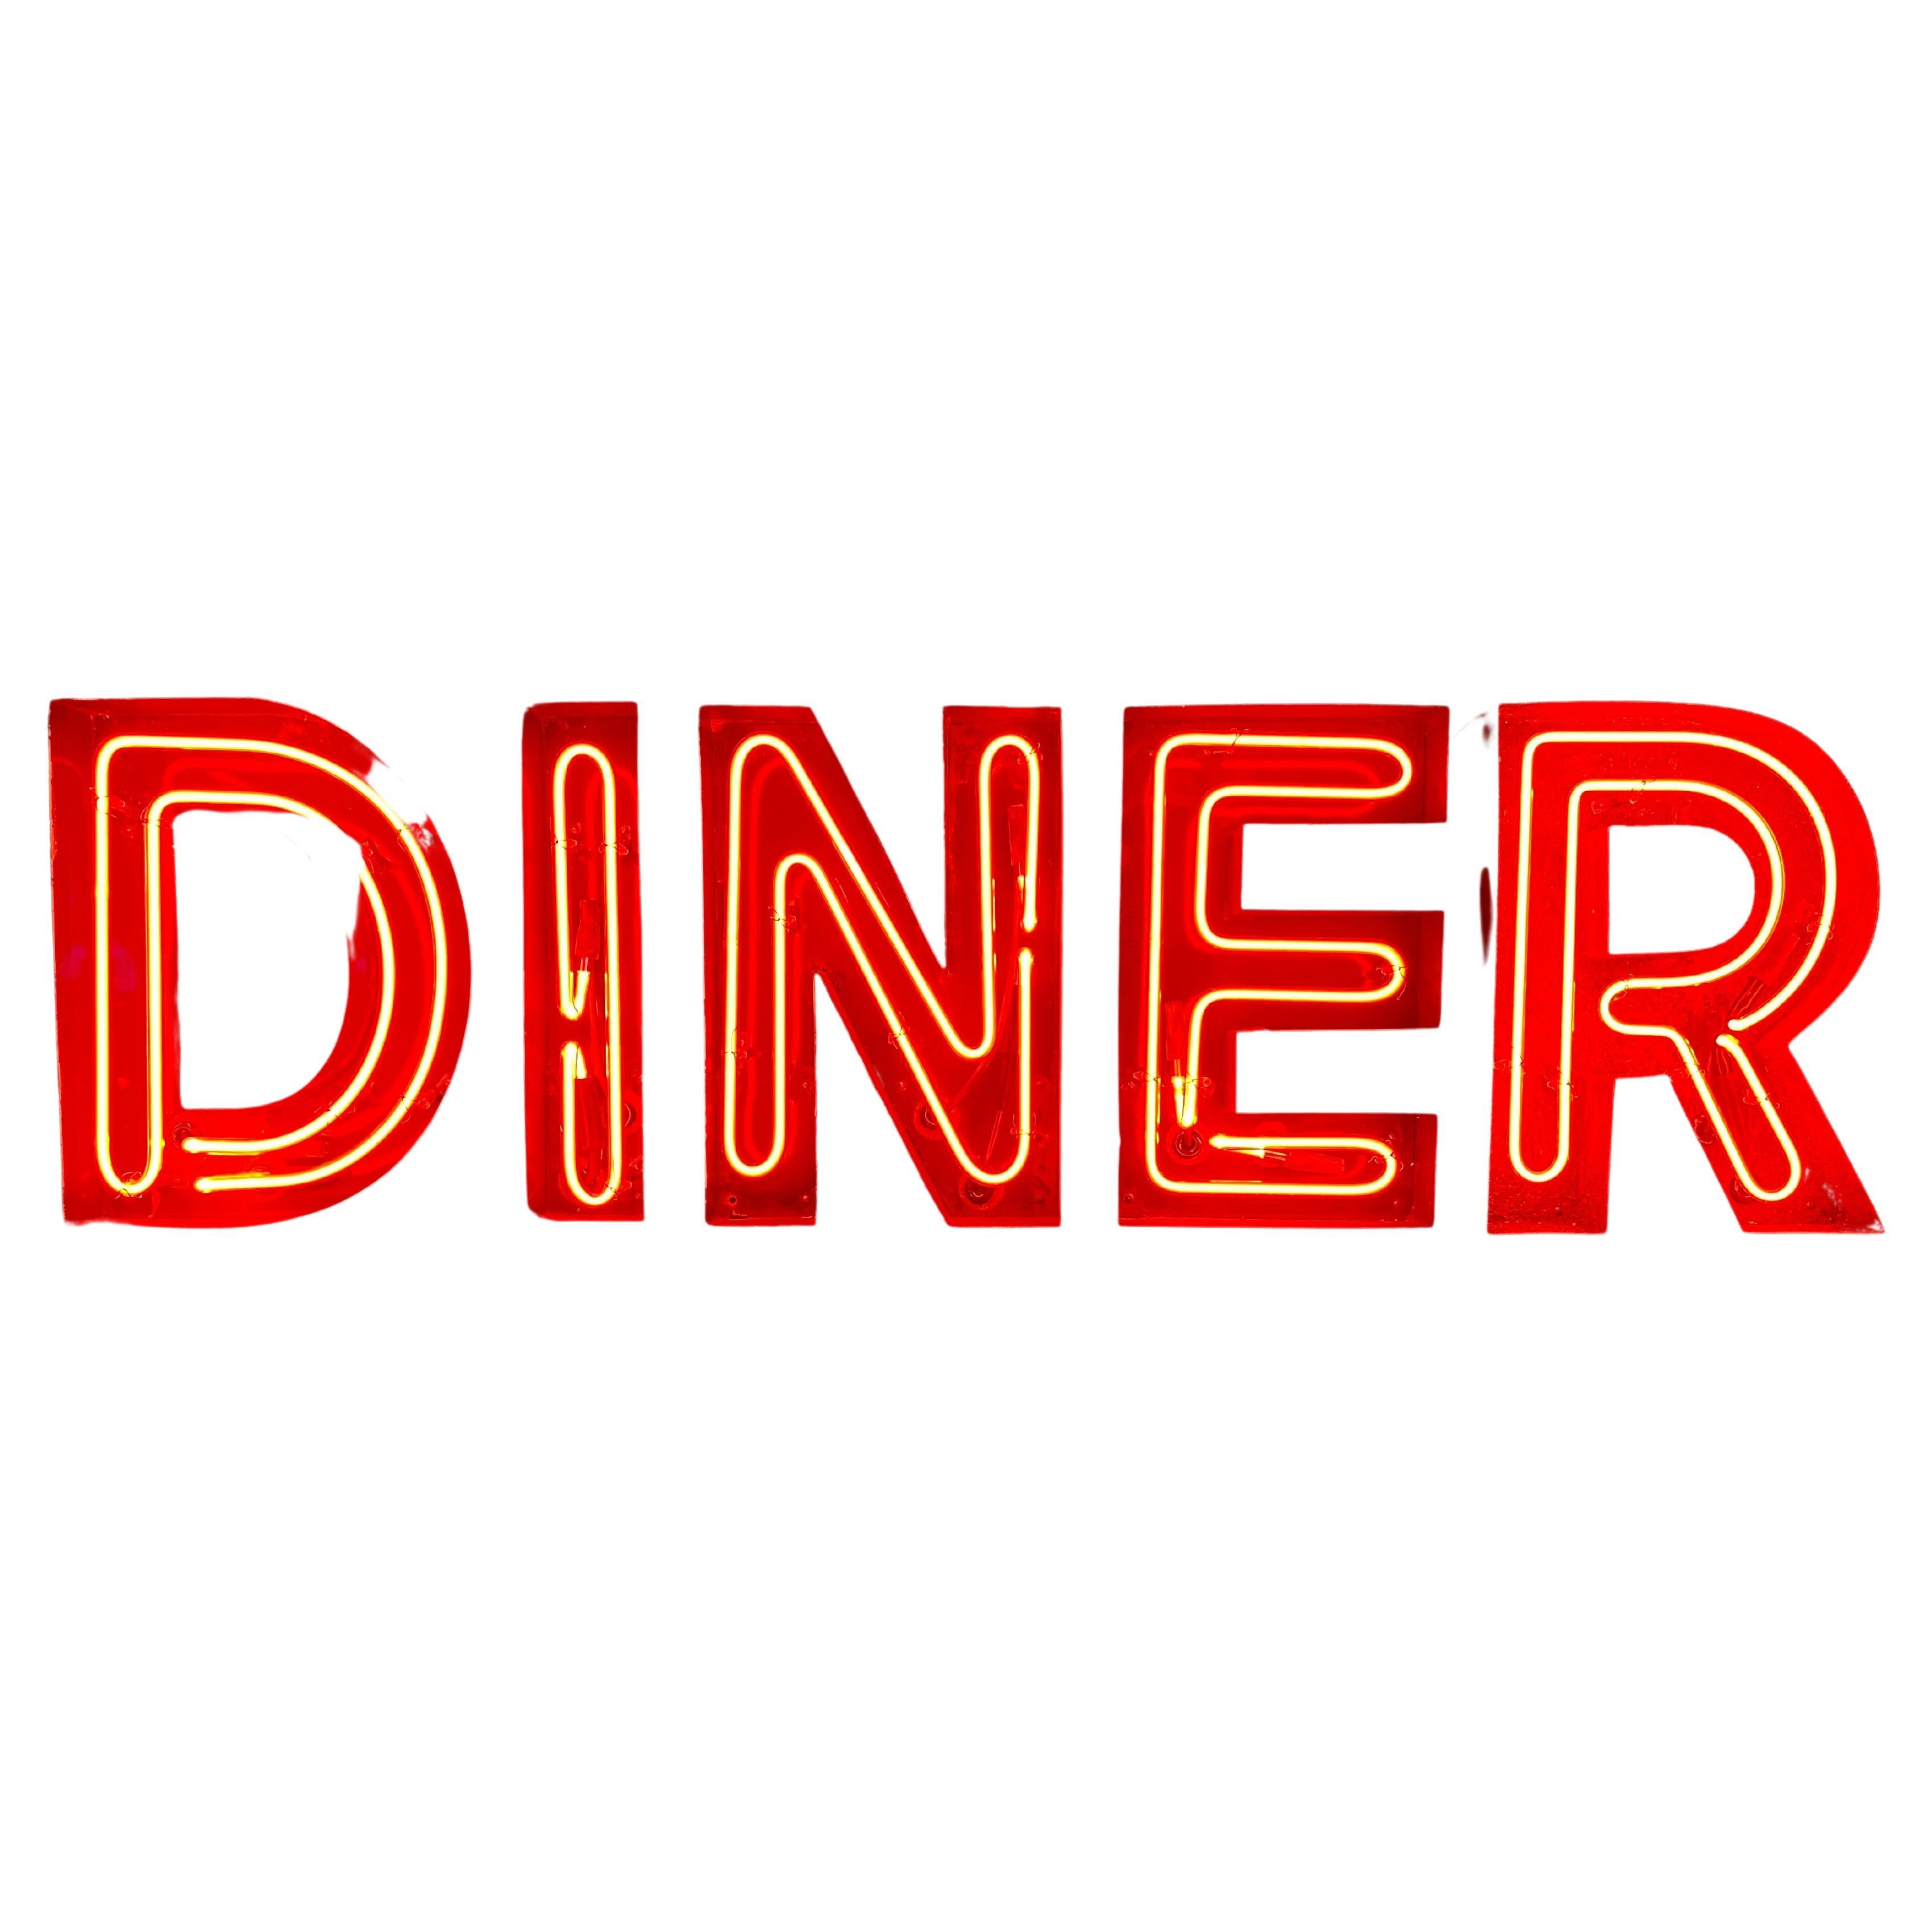 1950’s Neon Sign Diner For Sale